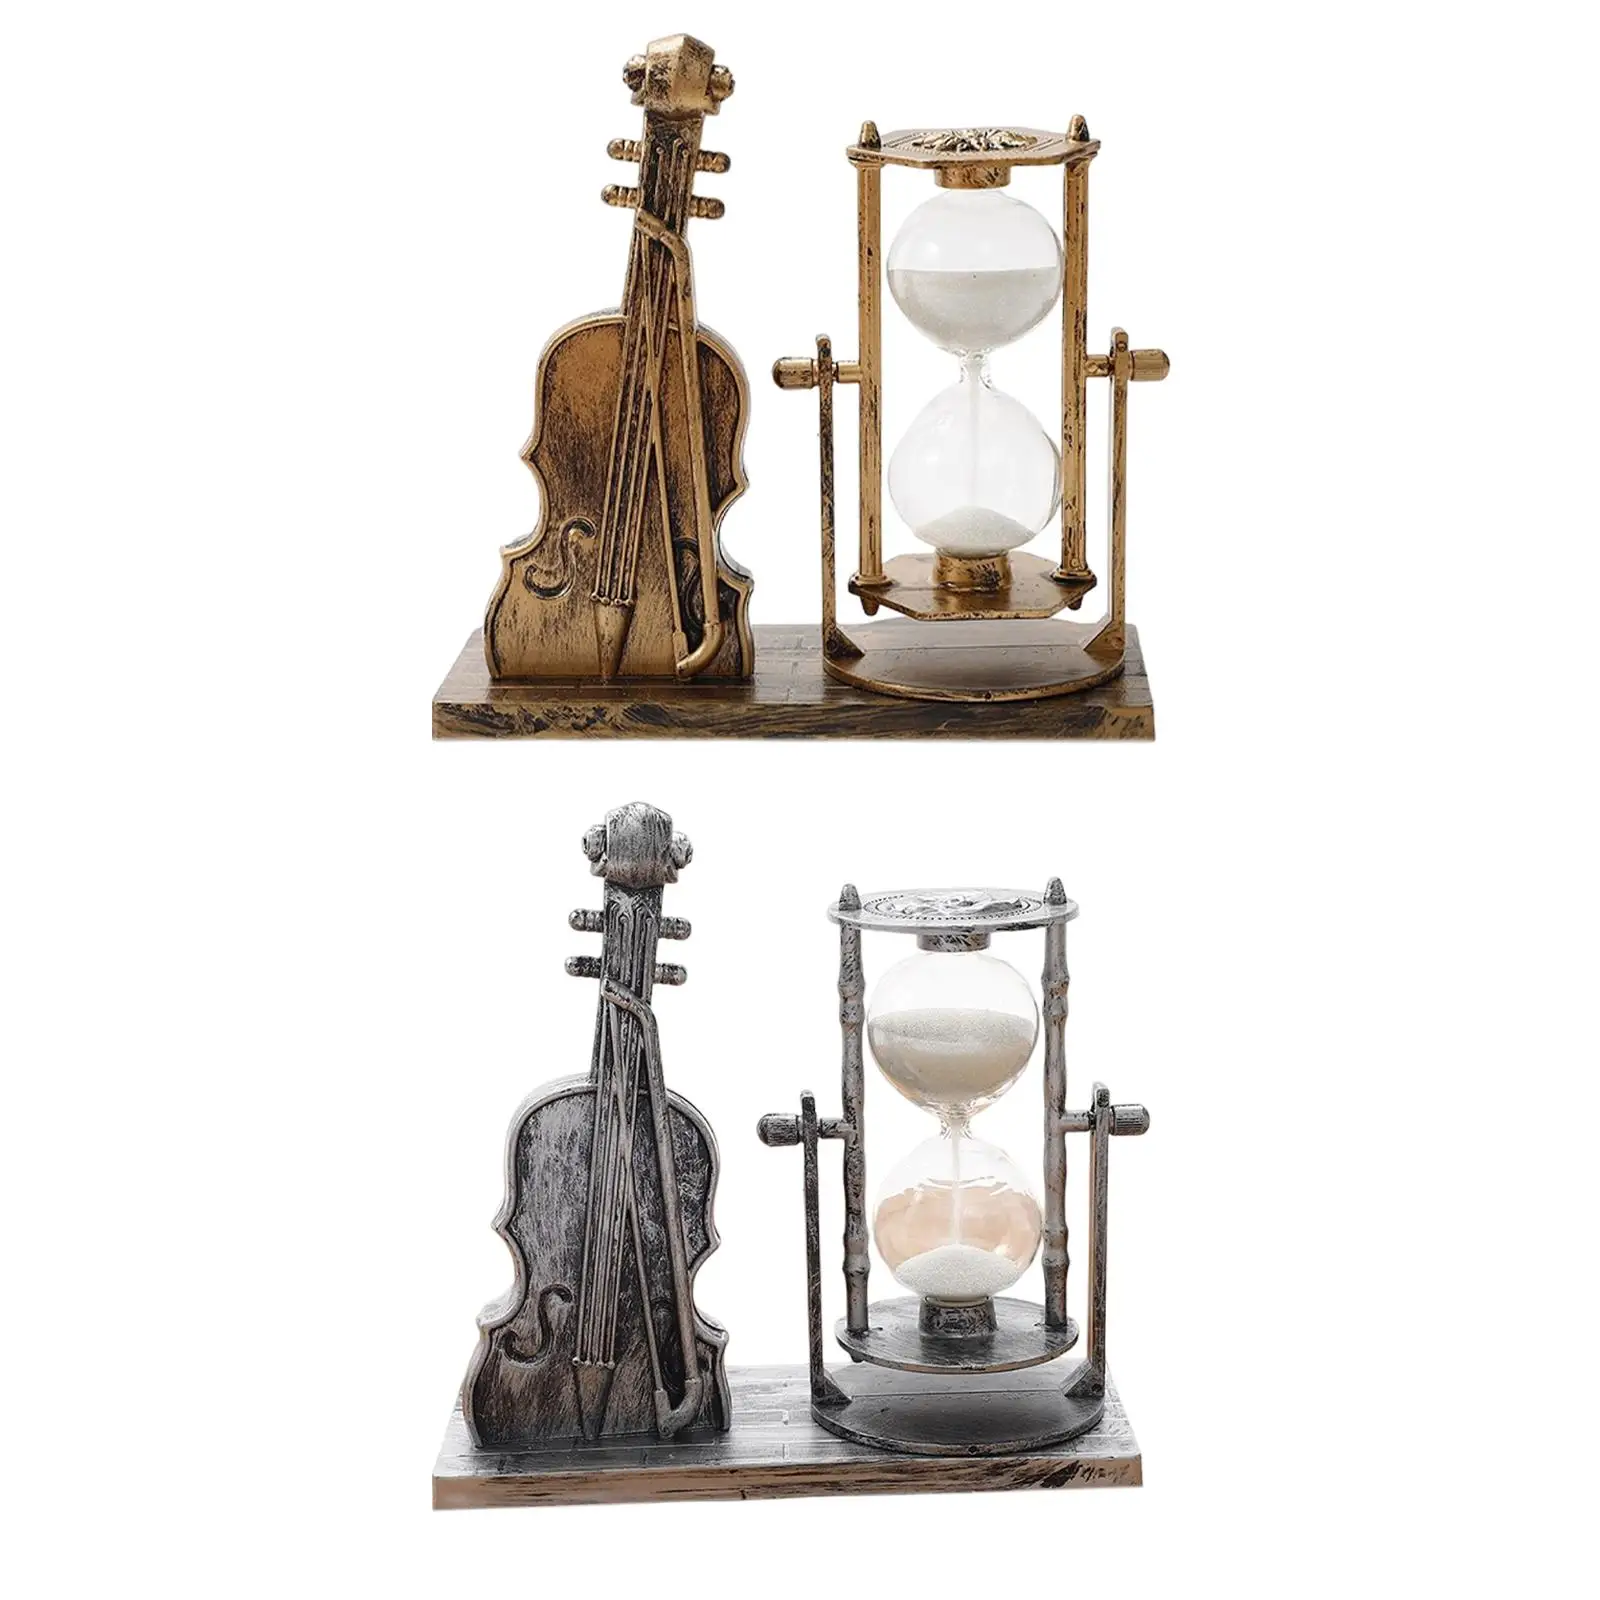 Violin Hourglasses Sandglass Exquisite Ornaments Collection Musical Instrument for Lawn Holiday Table Centerpieces Decoration